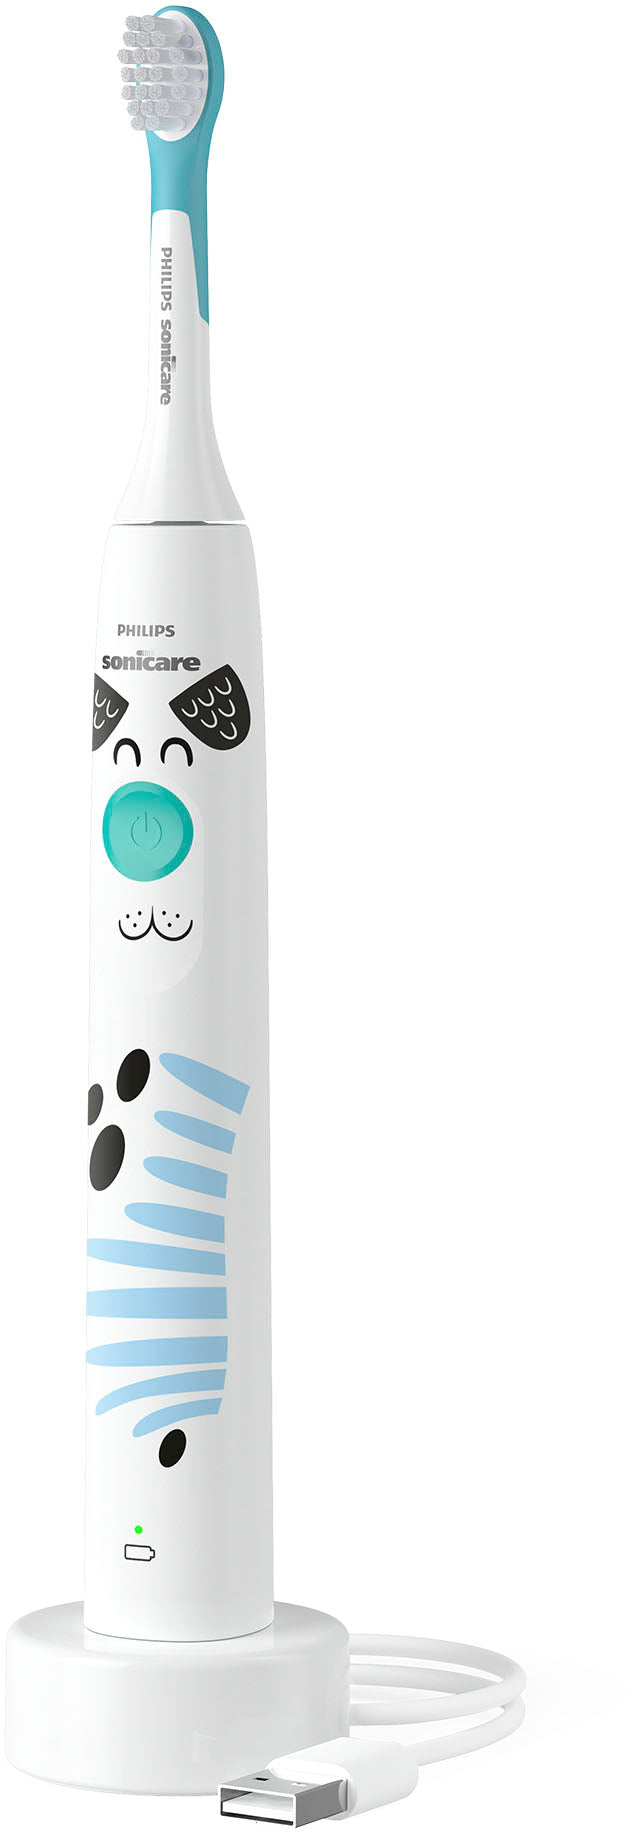 Philips Sonicare - Sonicare for Kids Design a Pet Edition Electric Toothbrush - White With Aqua Blue Button_1